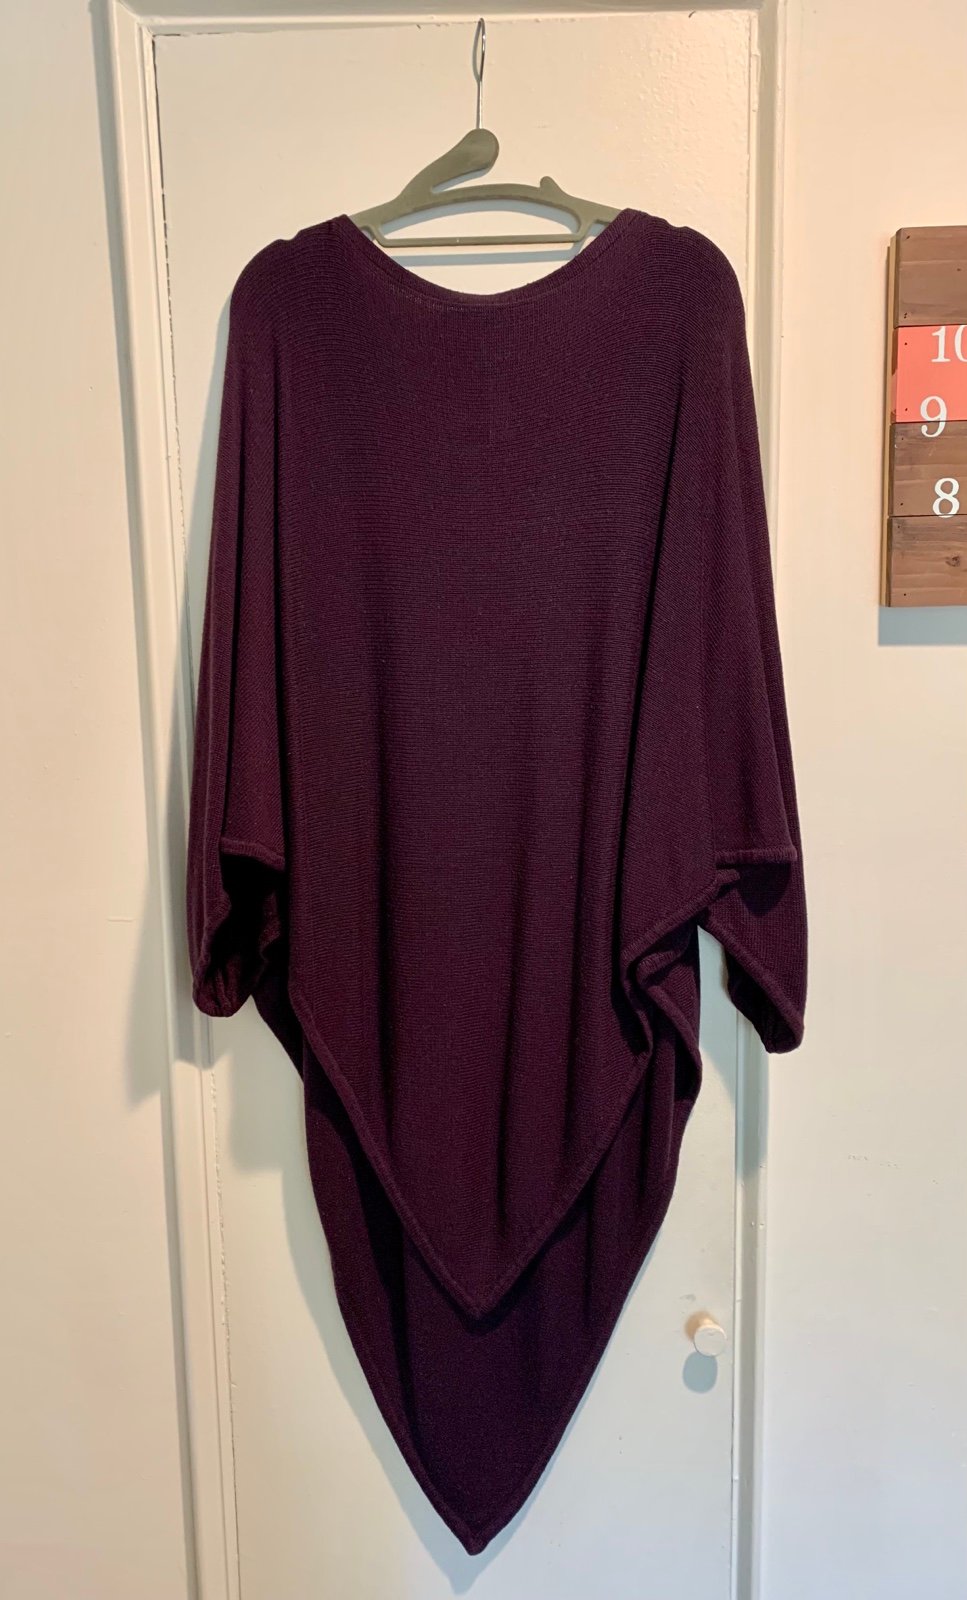 Discounted Lululemon poncho plBnBAcMC online store